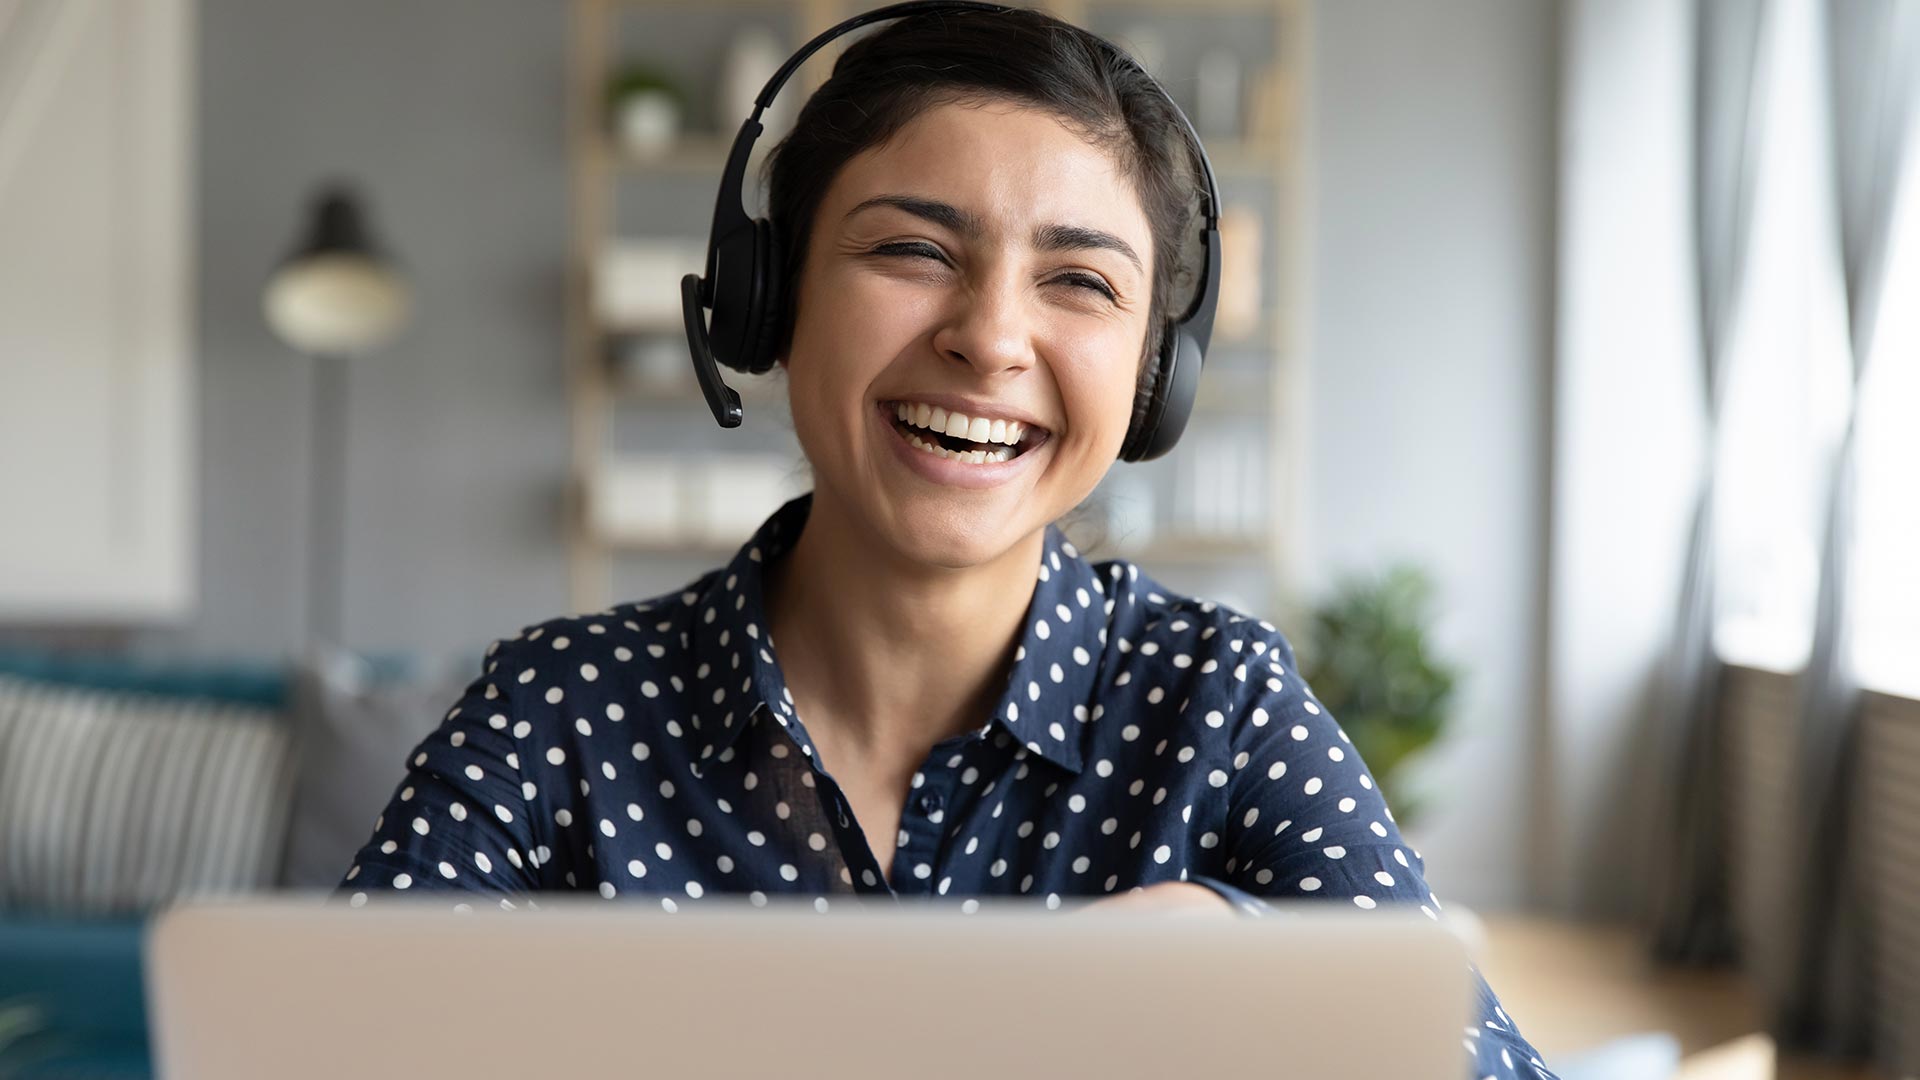 Young girl wearing headset sits laughing behind laptop screen